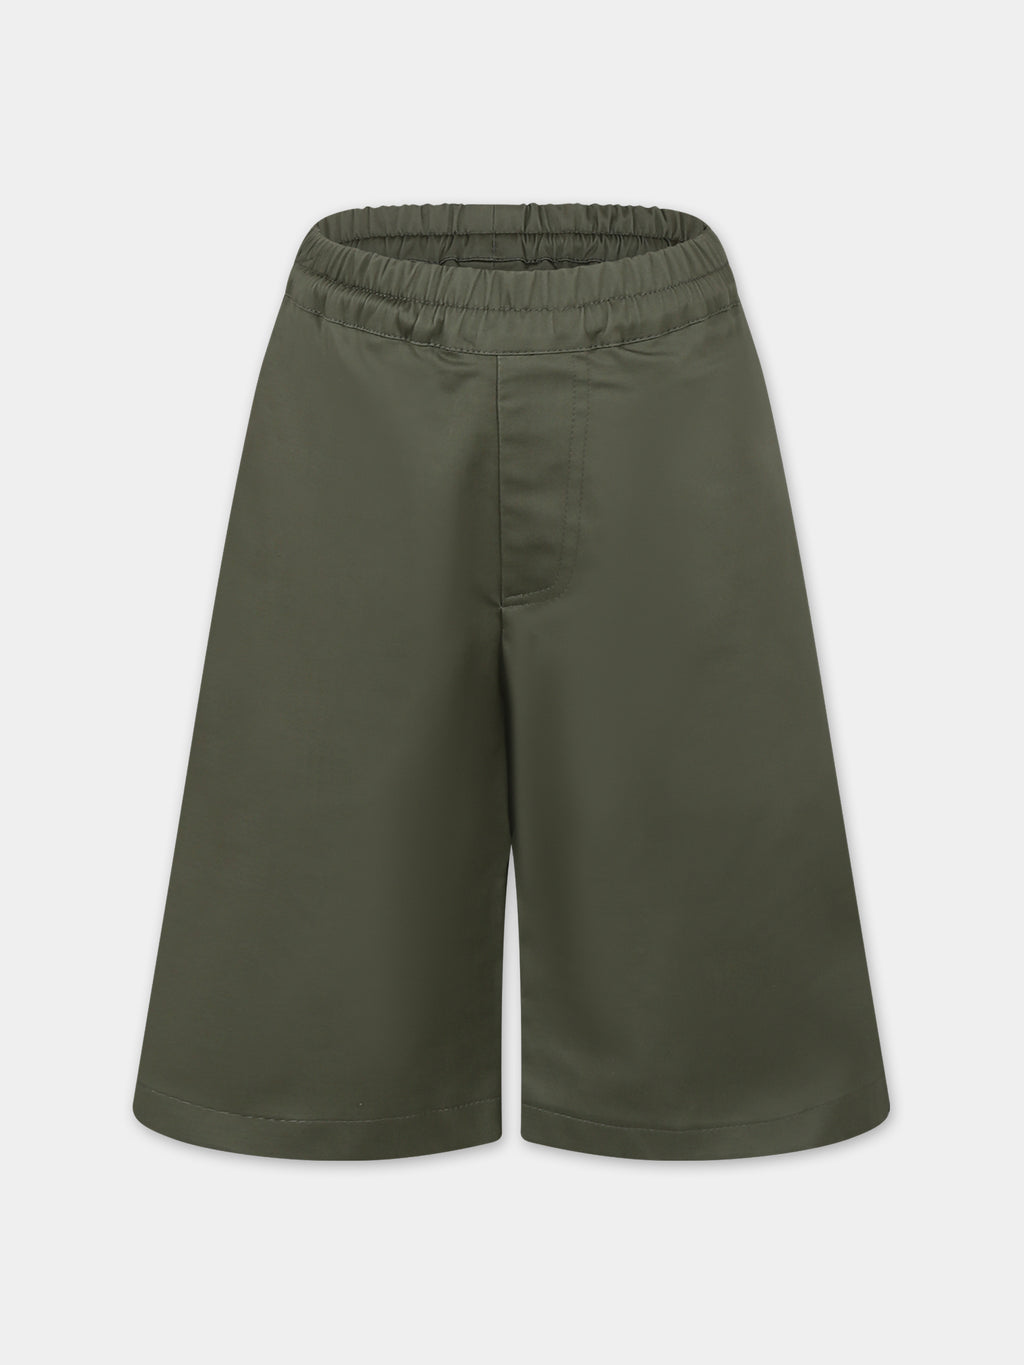 Green shorts for boy with logo